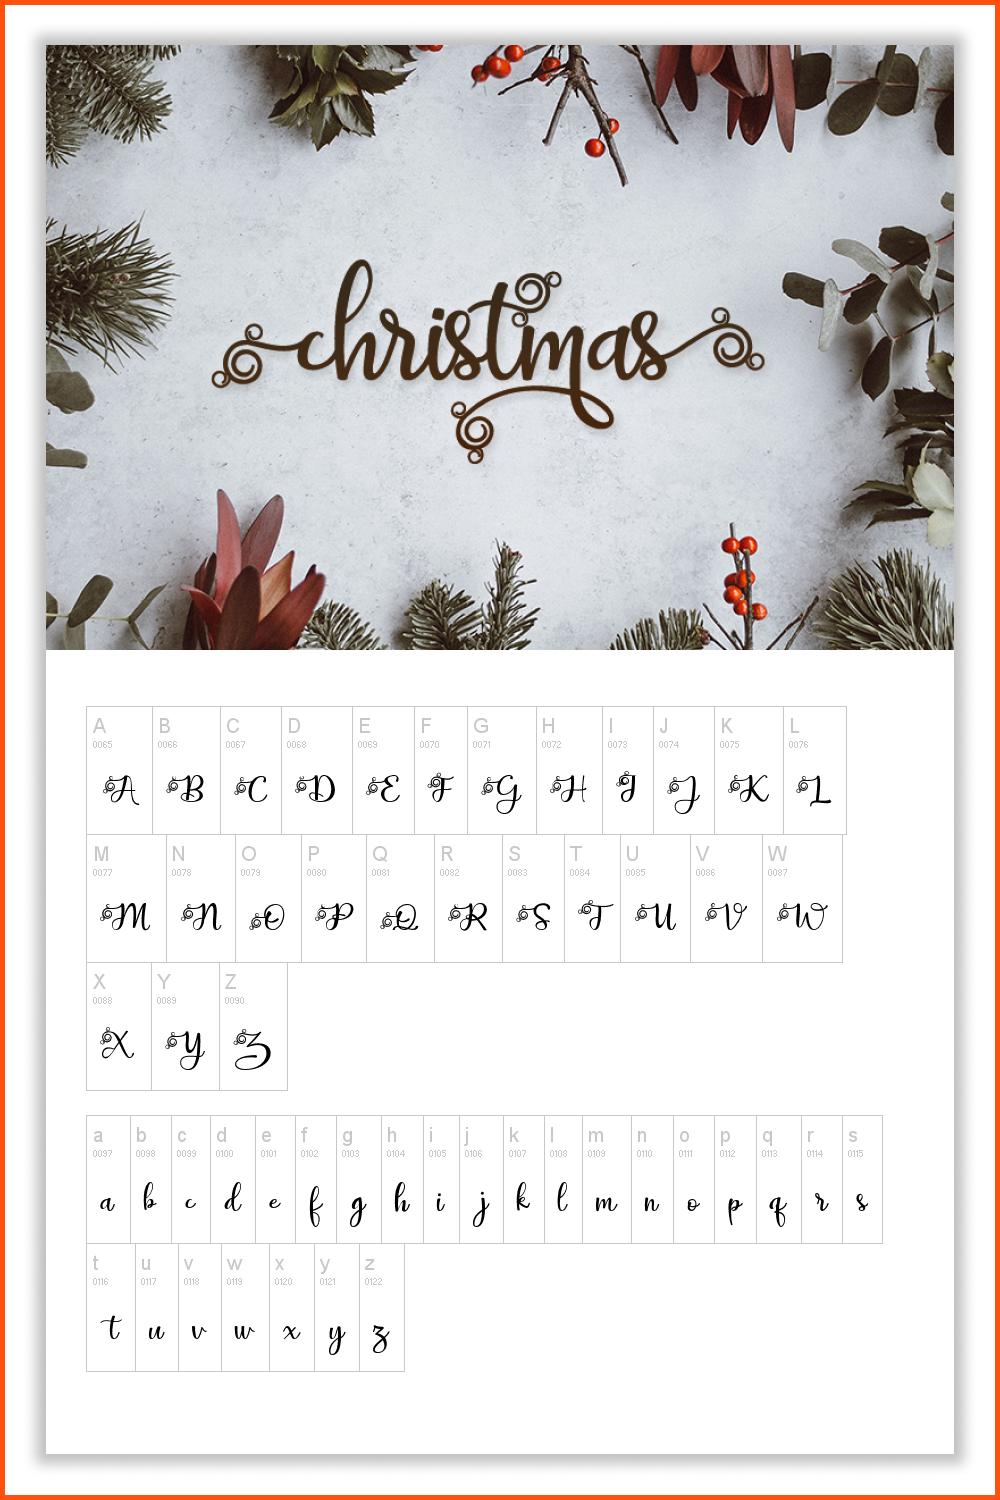 Collage of images of the alphabet and text from the background of Christmas decorations.